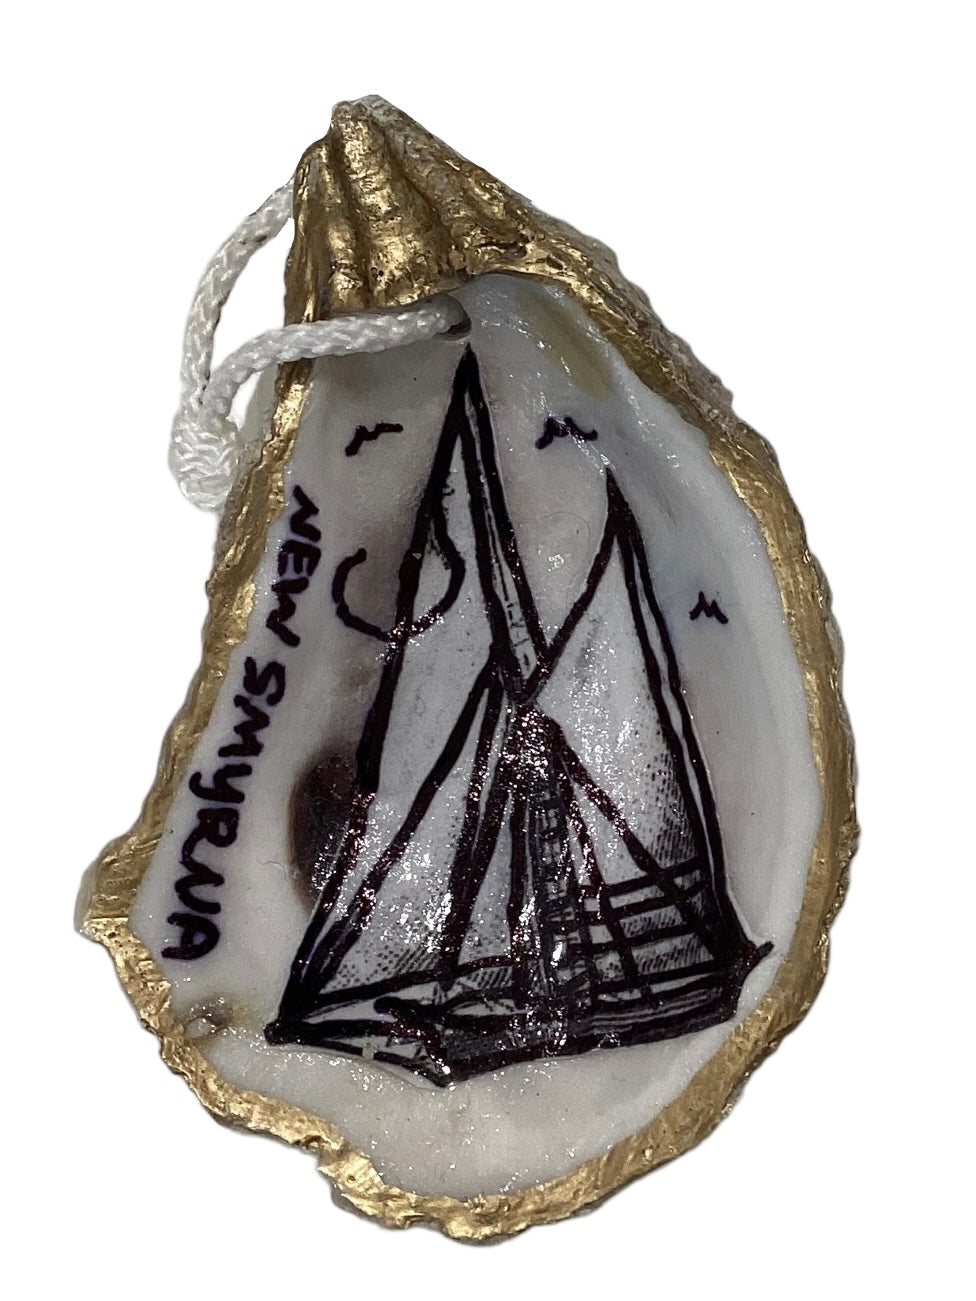 Ship Oyster Ornament